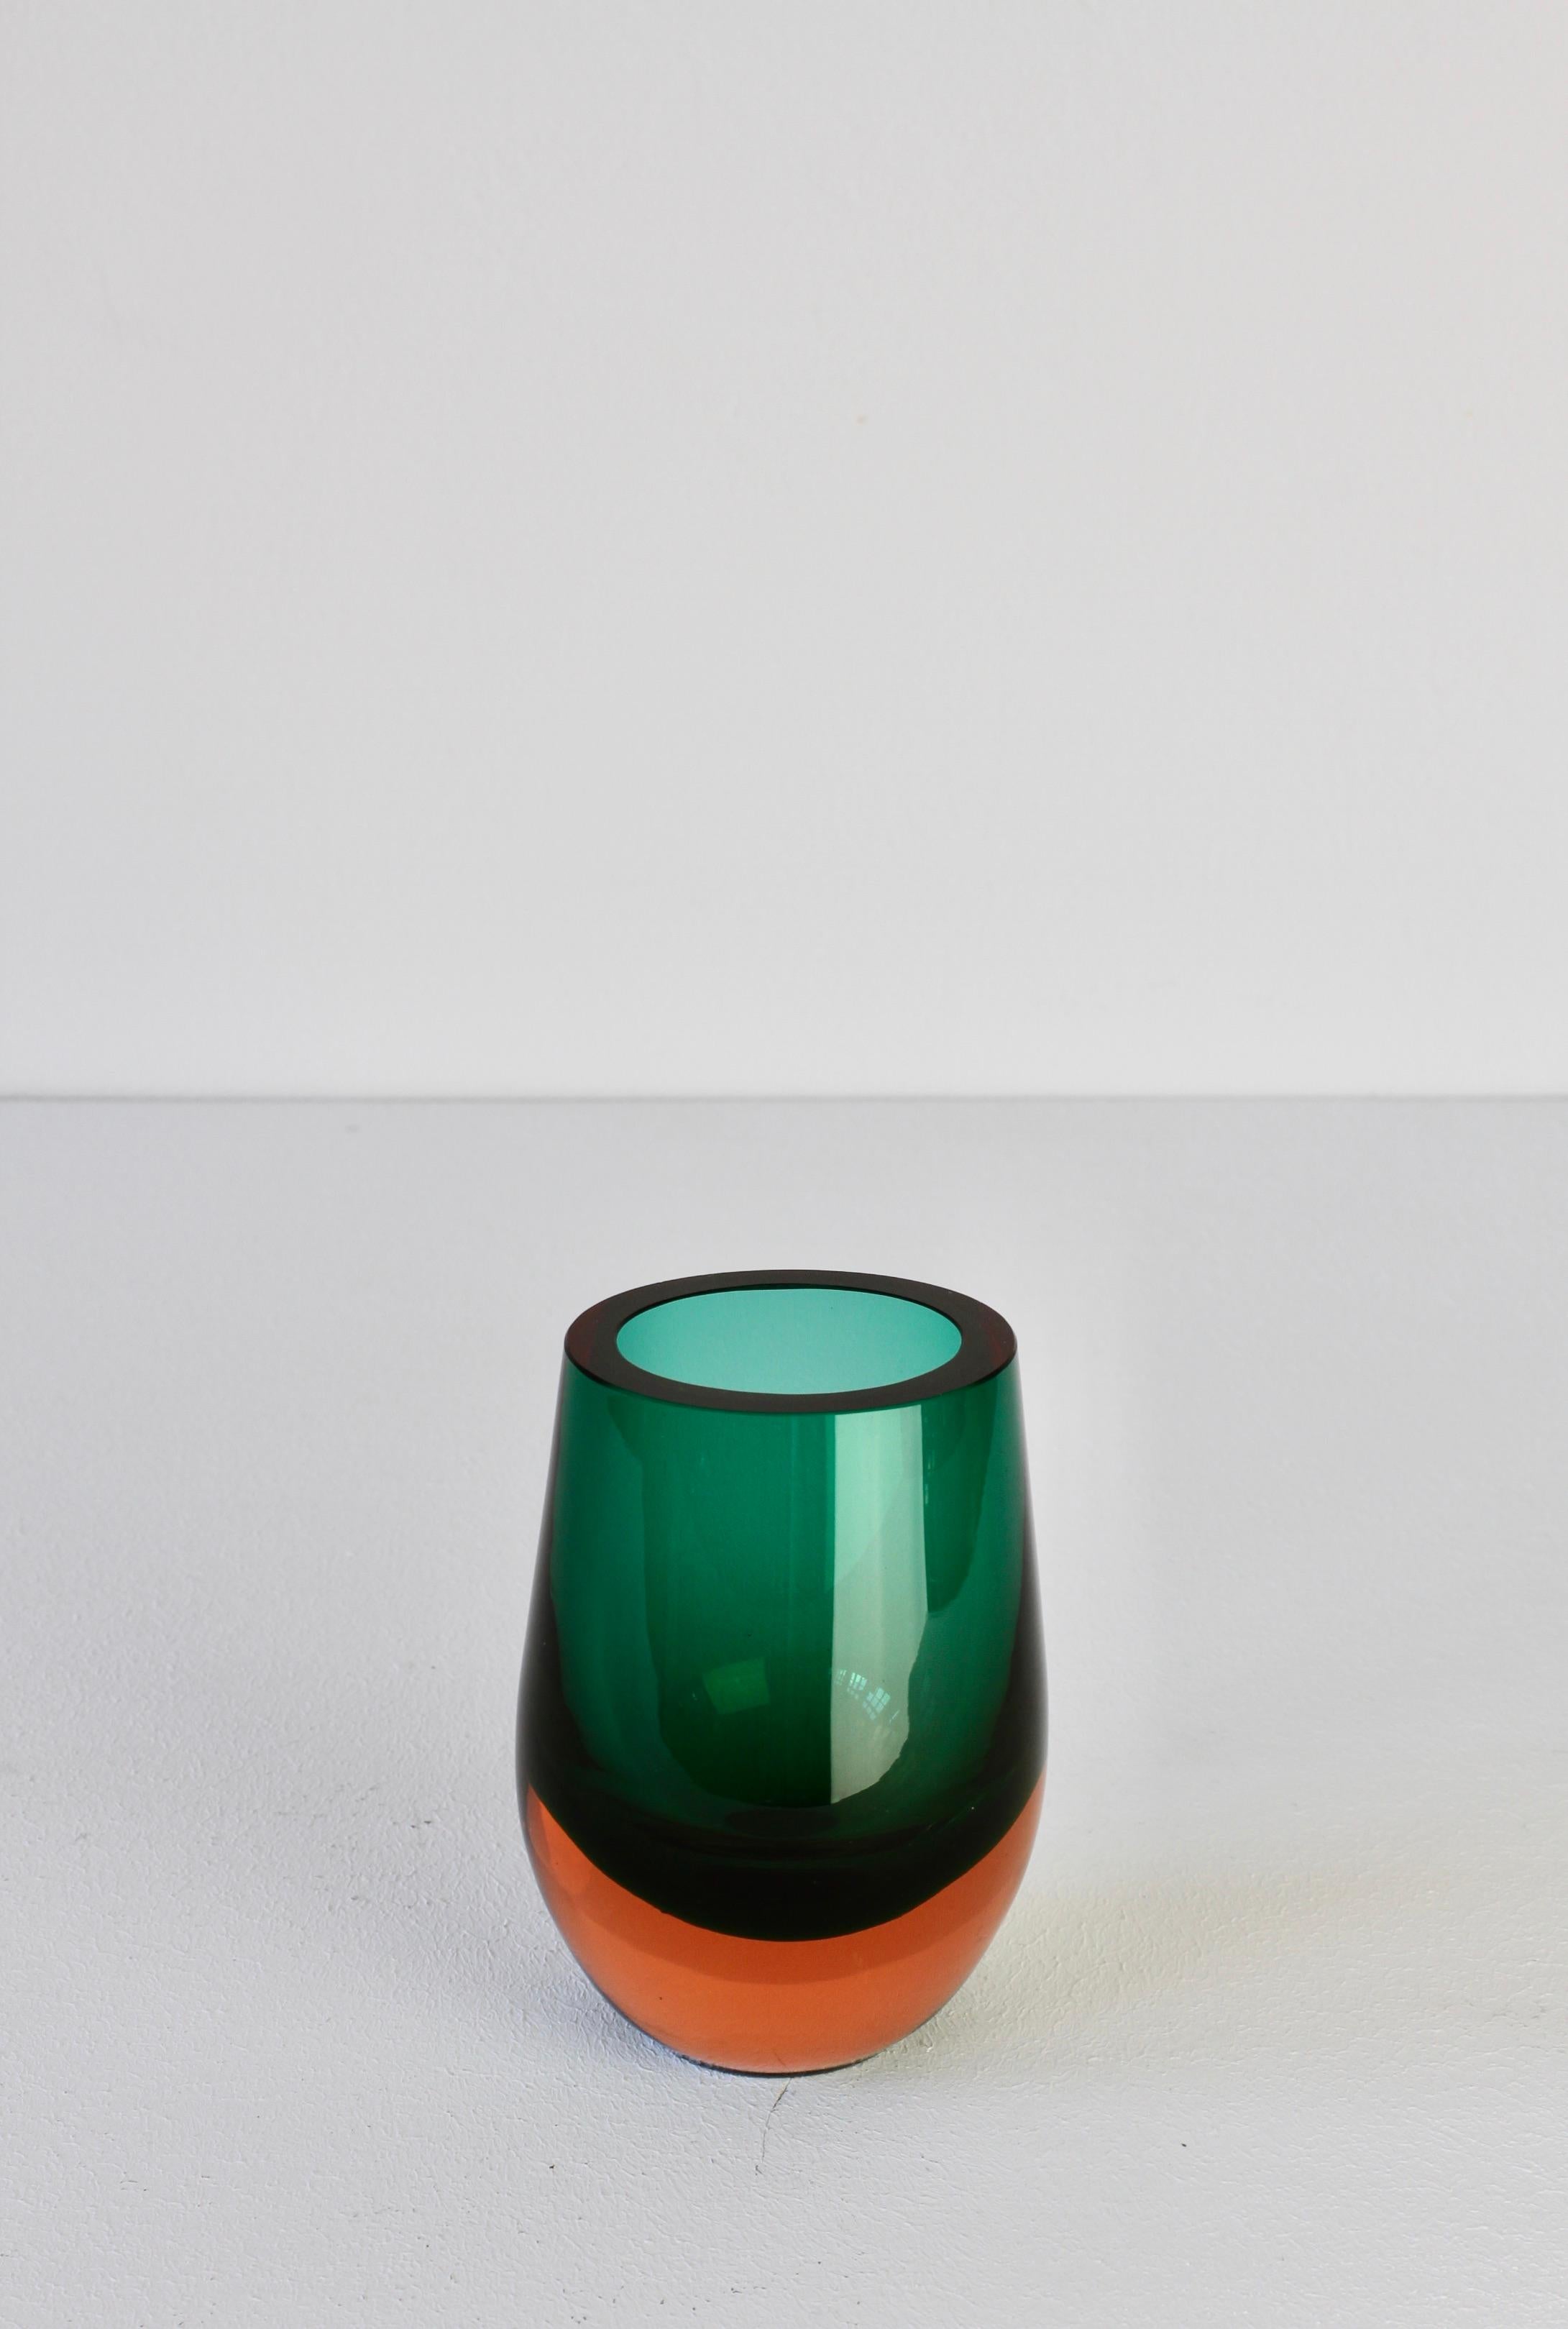 Vintage emerald green and burnt orange glass vase, using the Sommerso (submerged) technique (as favoured by many Murano glass makers) designed by Konrad Habermeier (1907-1992) for German midcentury glass manufacturer Gral Glas, 1965. Just as elegant